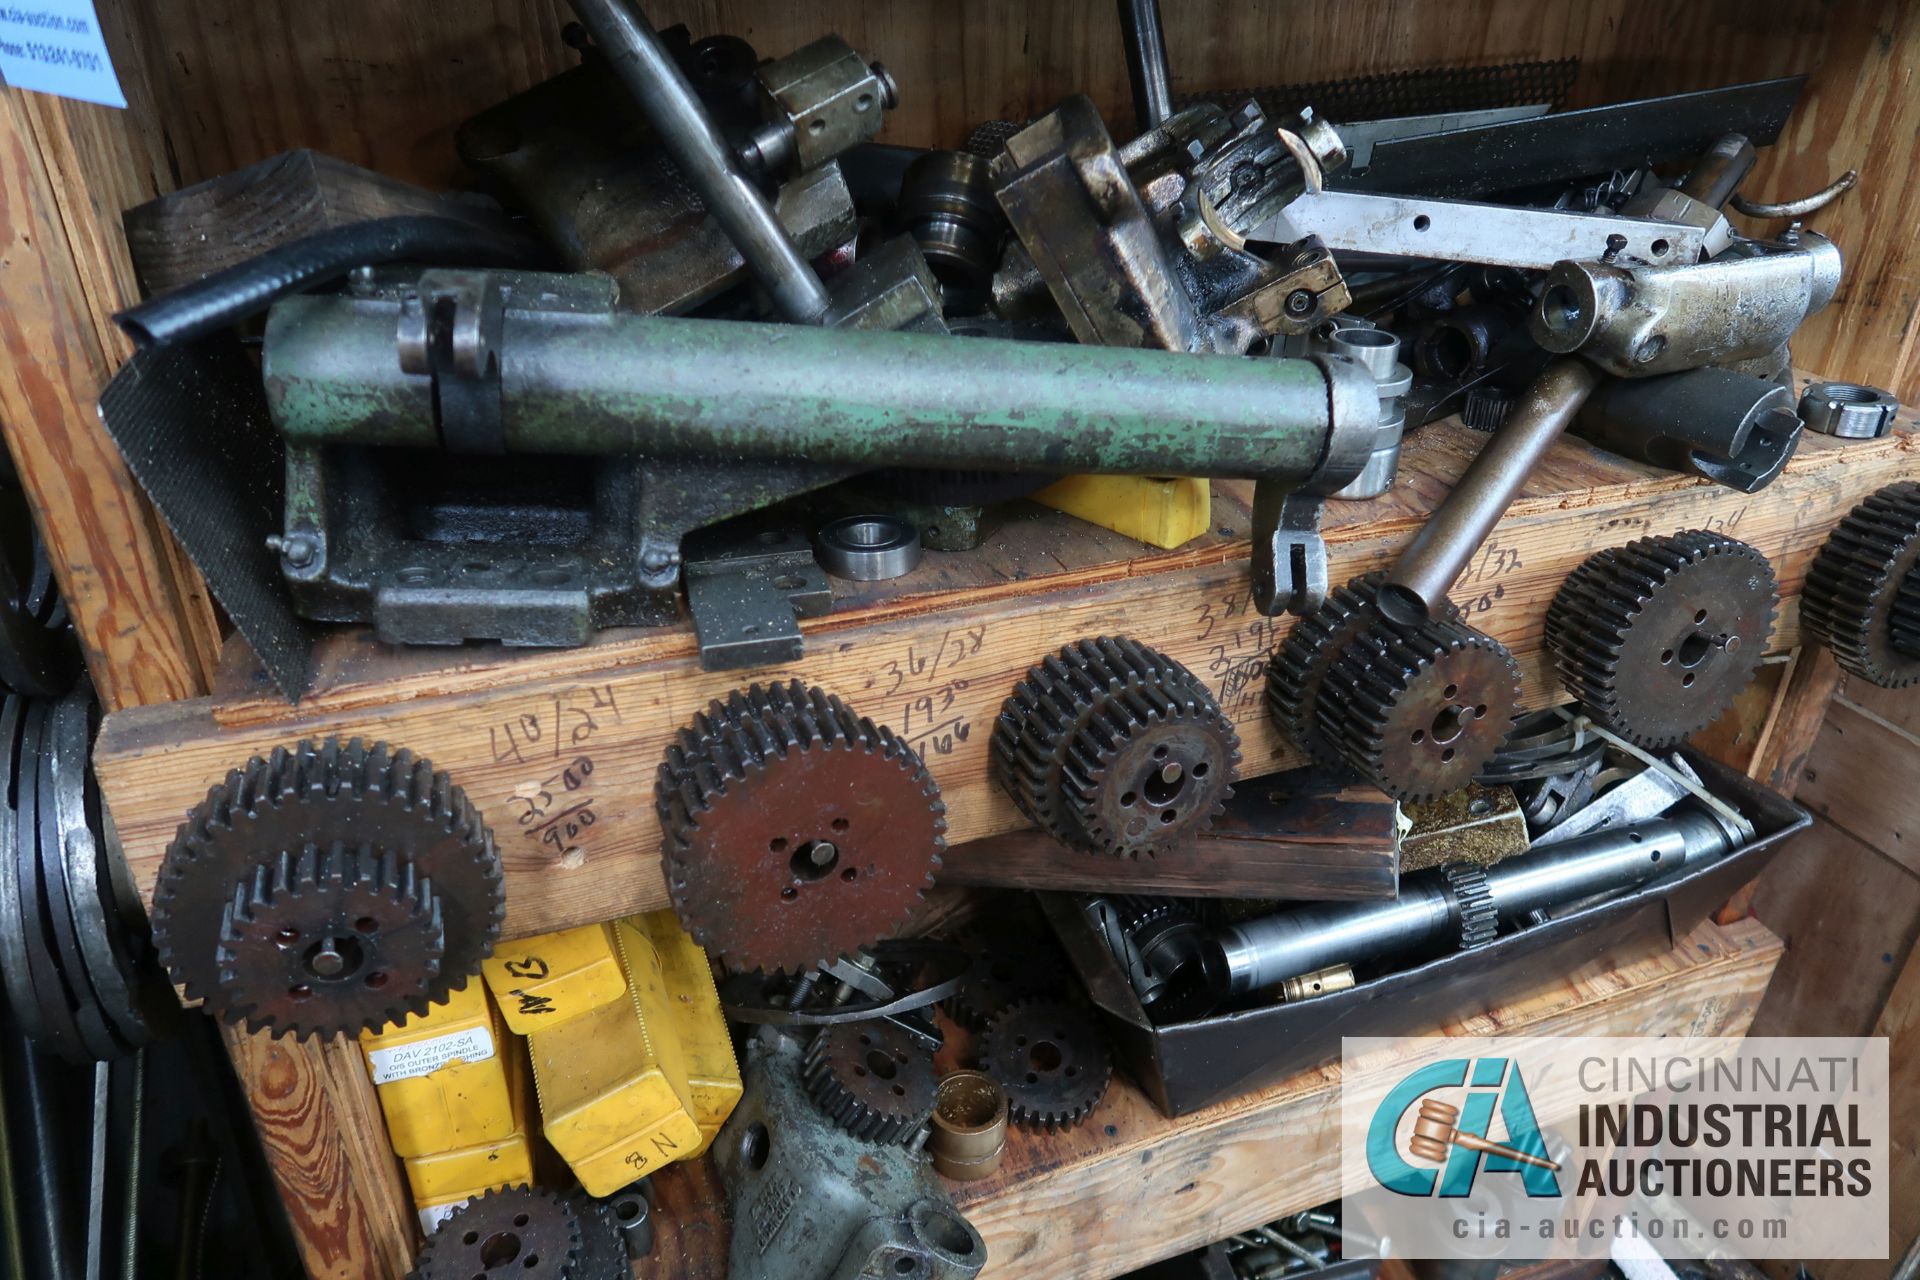 (LOT) LARGE ASSORTMENT MISCELLANEOUS DAVENPORT TOOLING, ATTACHMENTS, GEARS, CAMS AND OTHER RELATED - Image 6 of 21